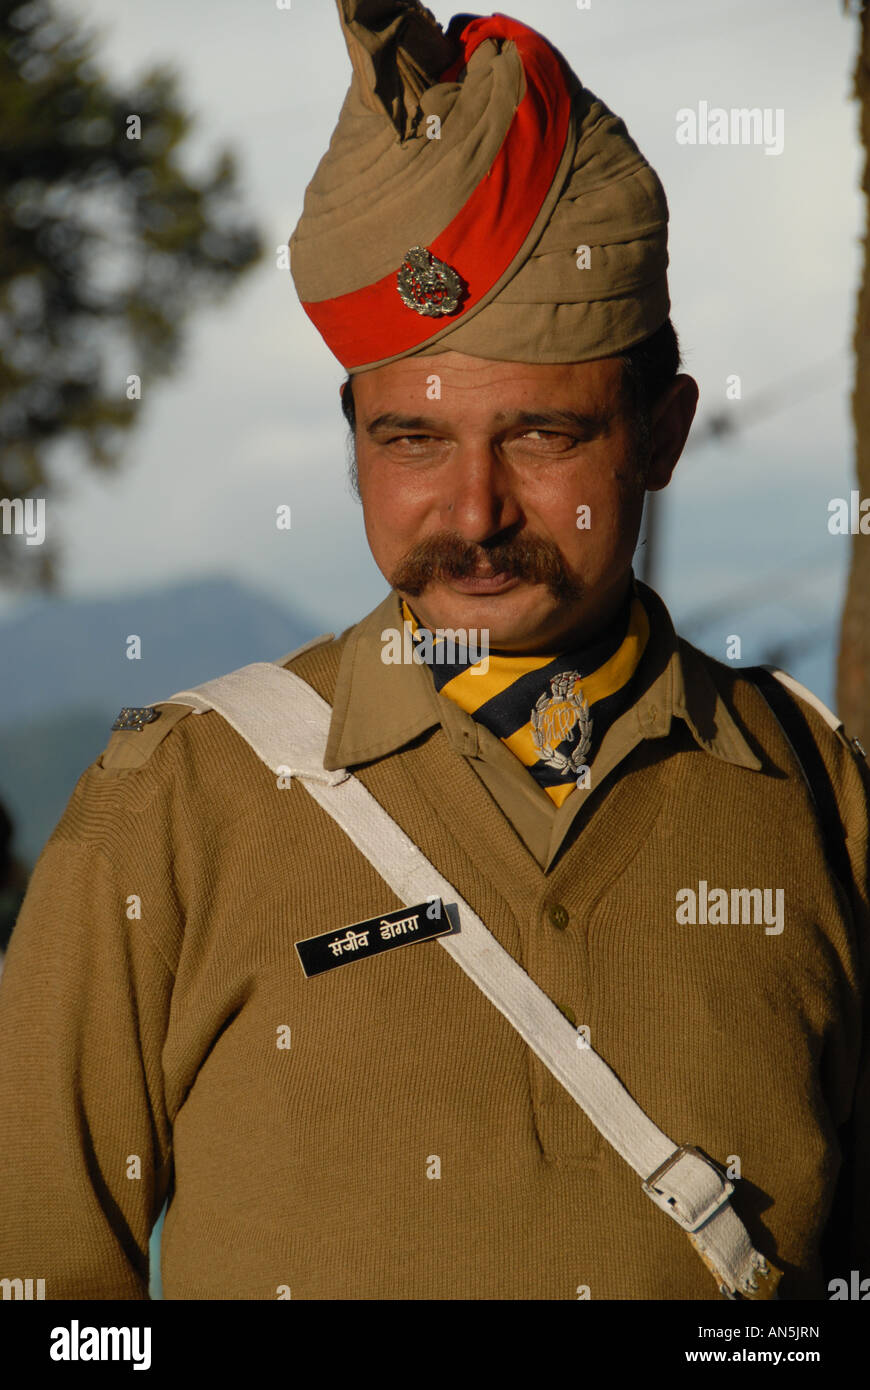 A portrait of an Indian military man in full uniform India Stock Photo -  Alamy